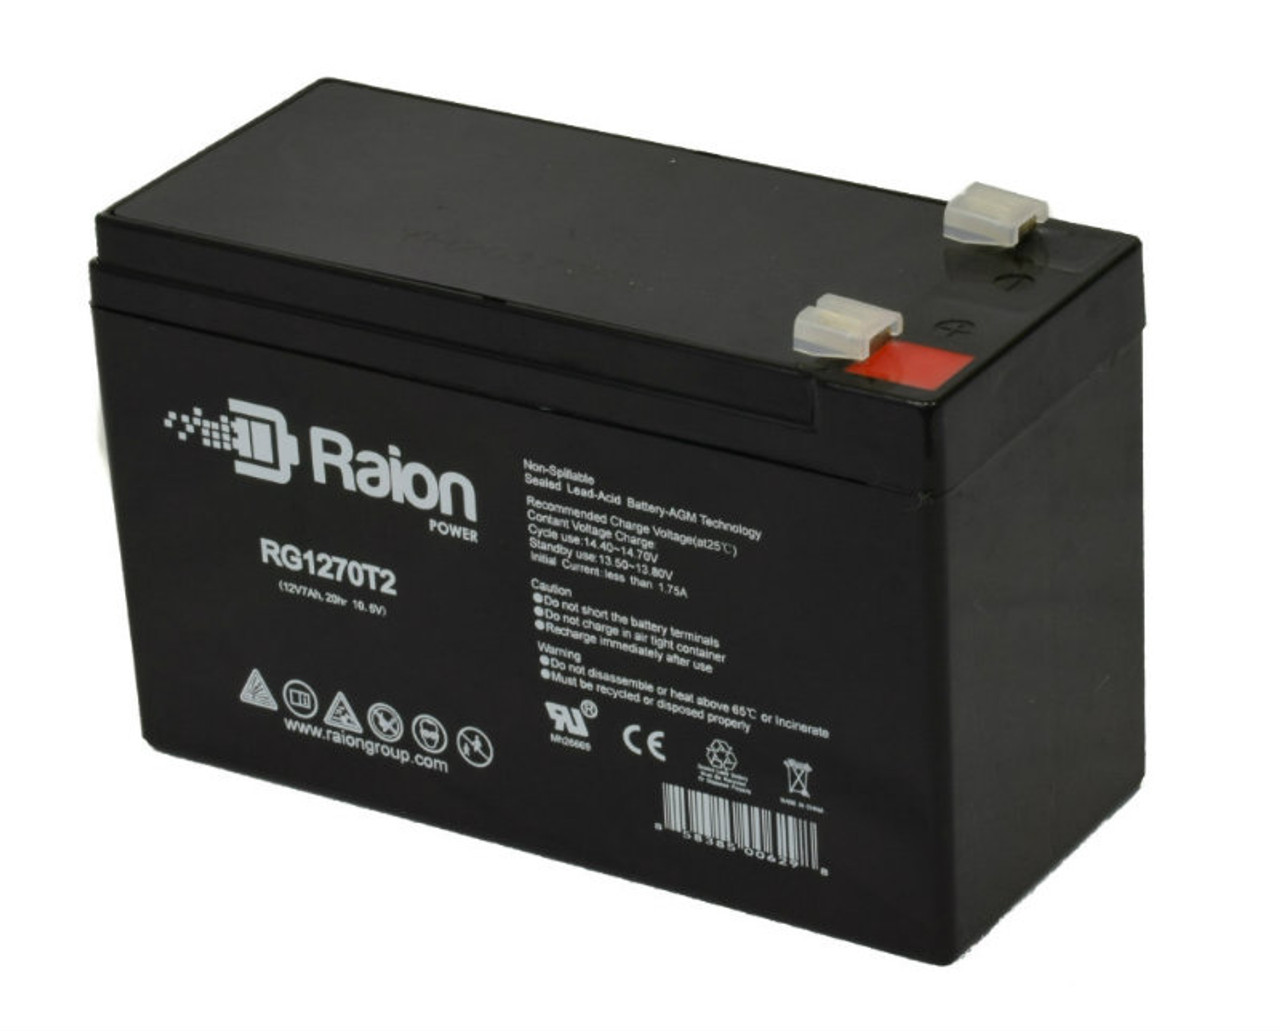 Raion Power Replacement 12V 7Ah RG1270T1 Fire Alarm Battery for Alarm Lock